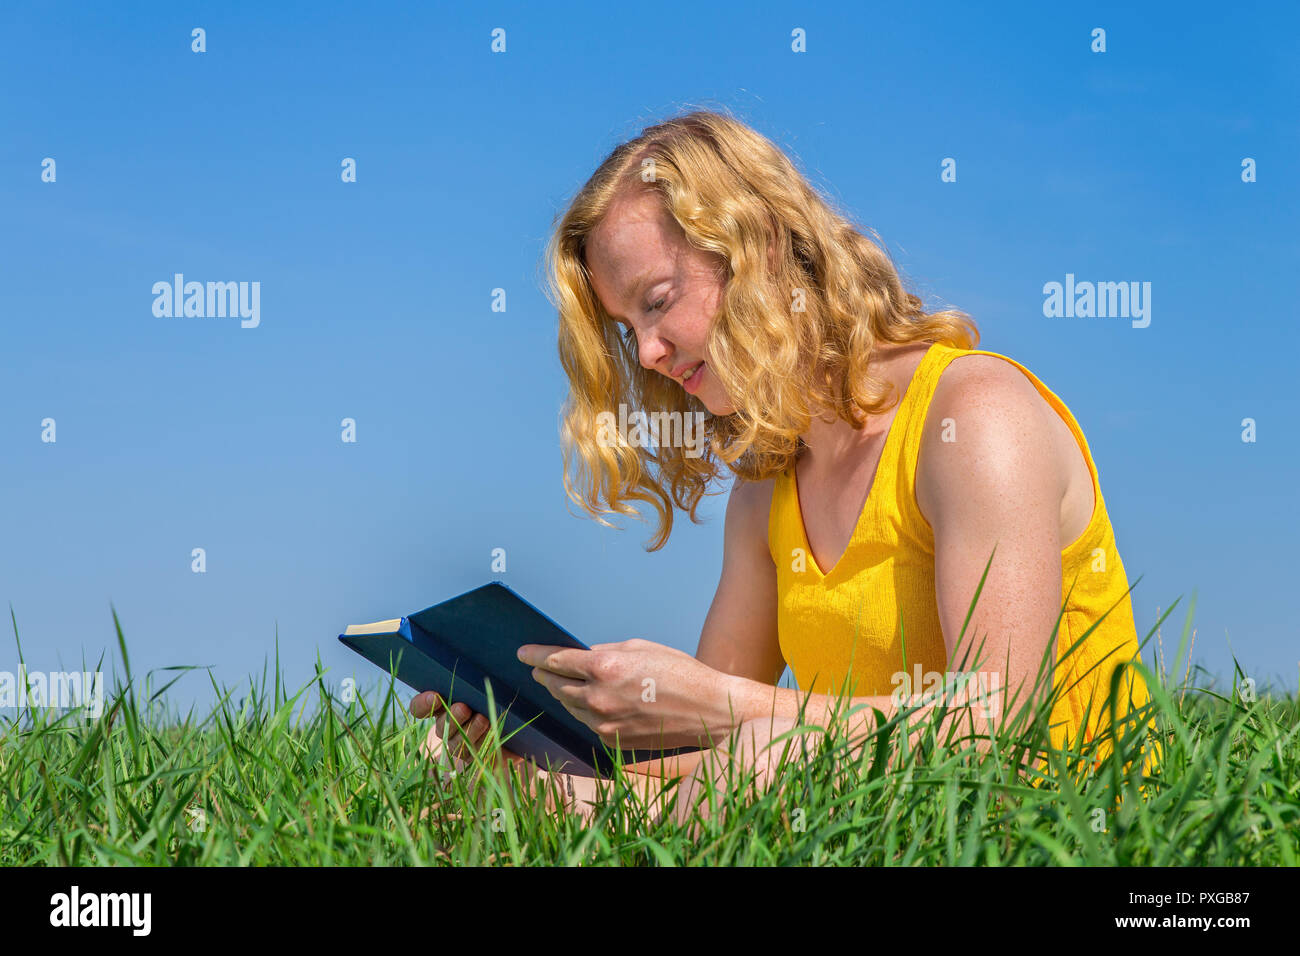 Young caucasian woman reads book in grass with blue sky Stock Photo